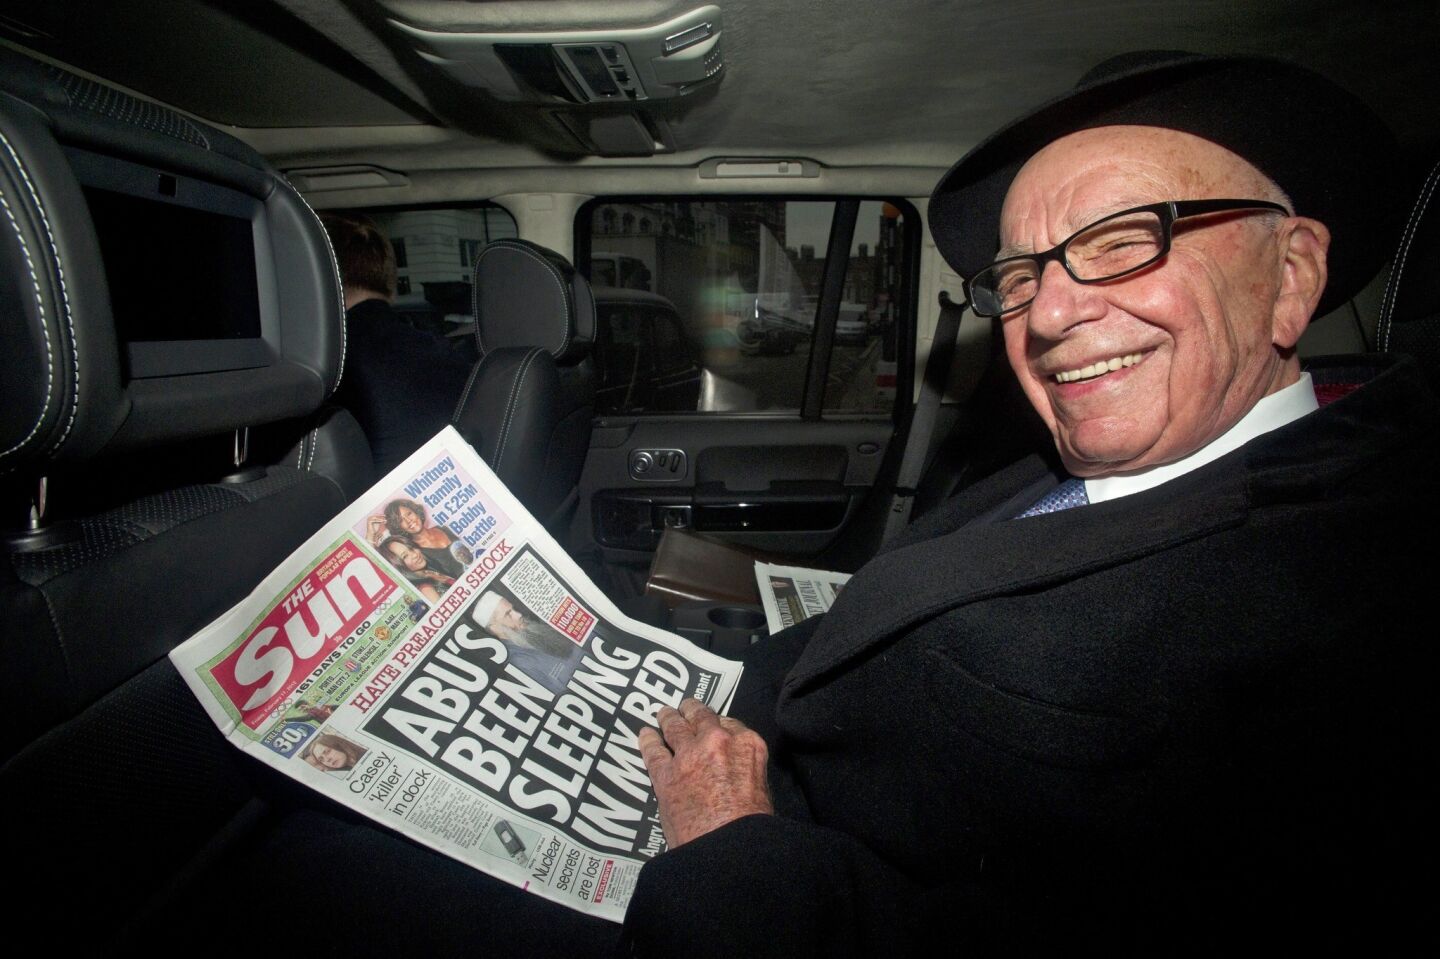 Rupert Murdoch, CEO of News Corp., received a compensation package of $30 million in 2012. Despite legal controversy, Murdoch continues to dominate large portions of the media.